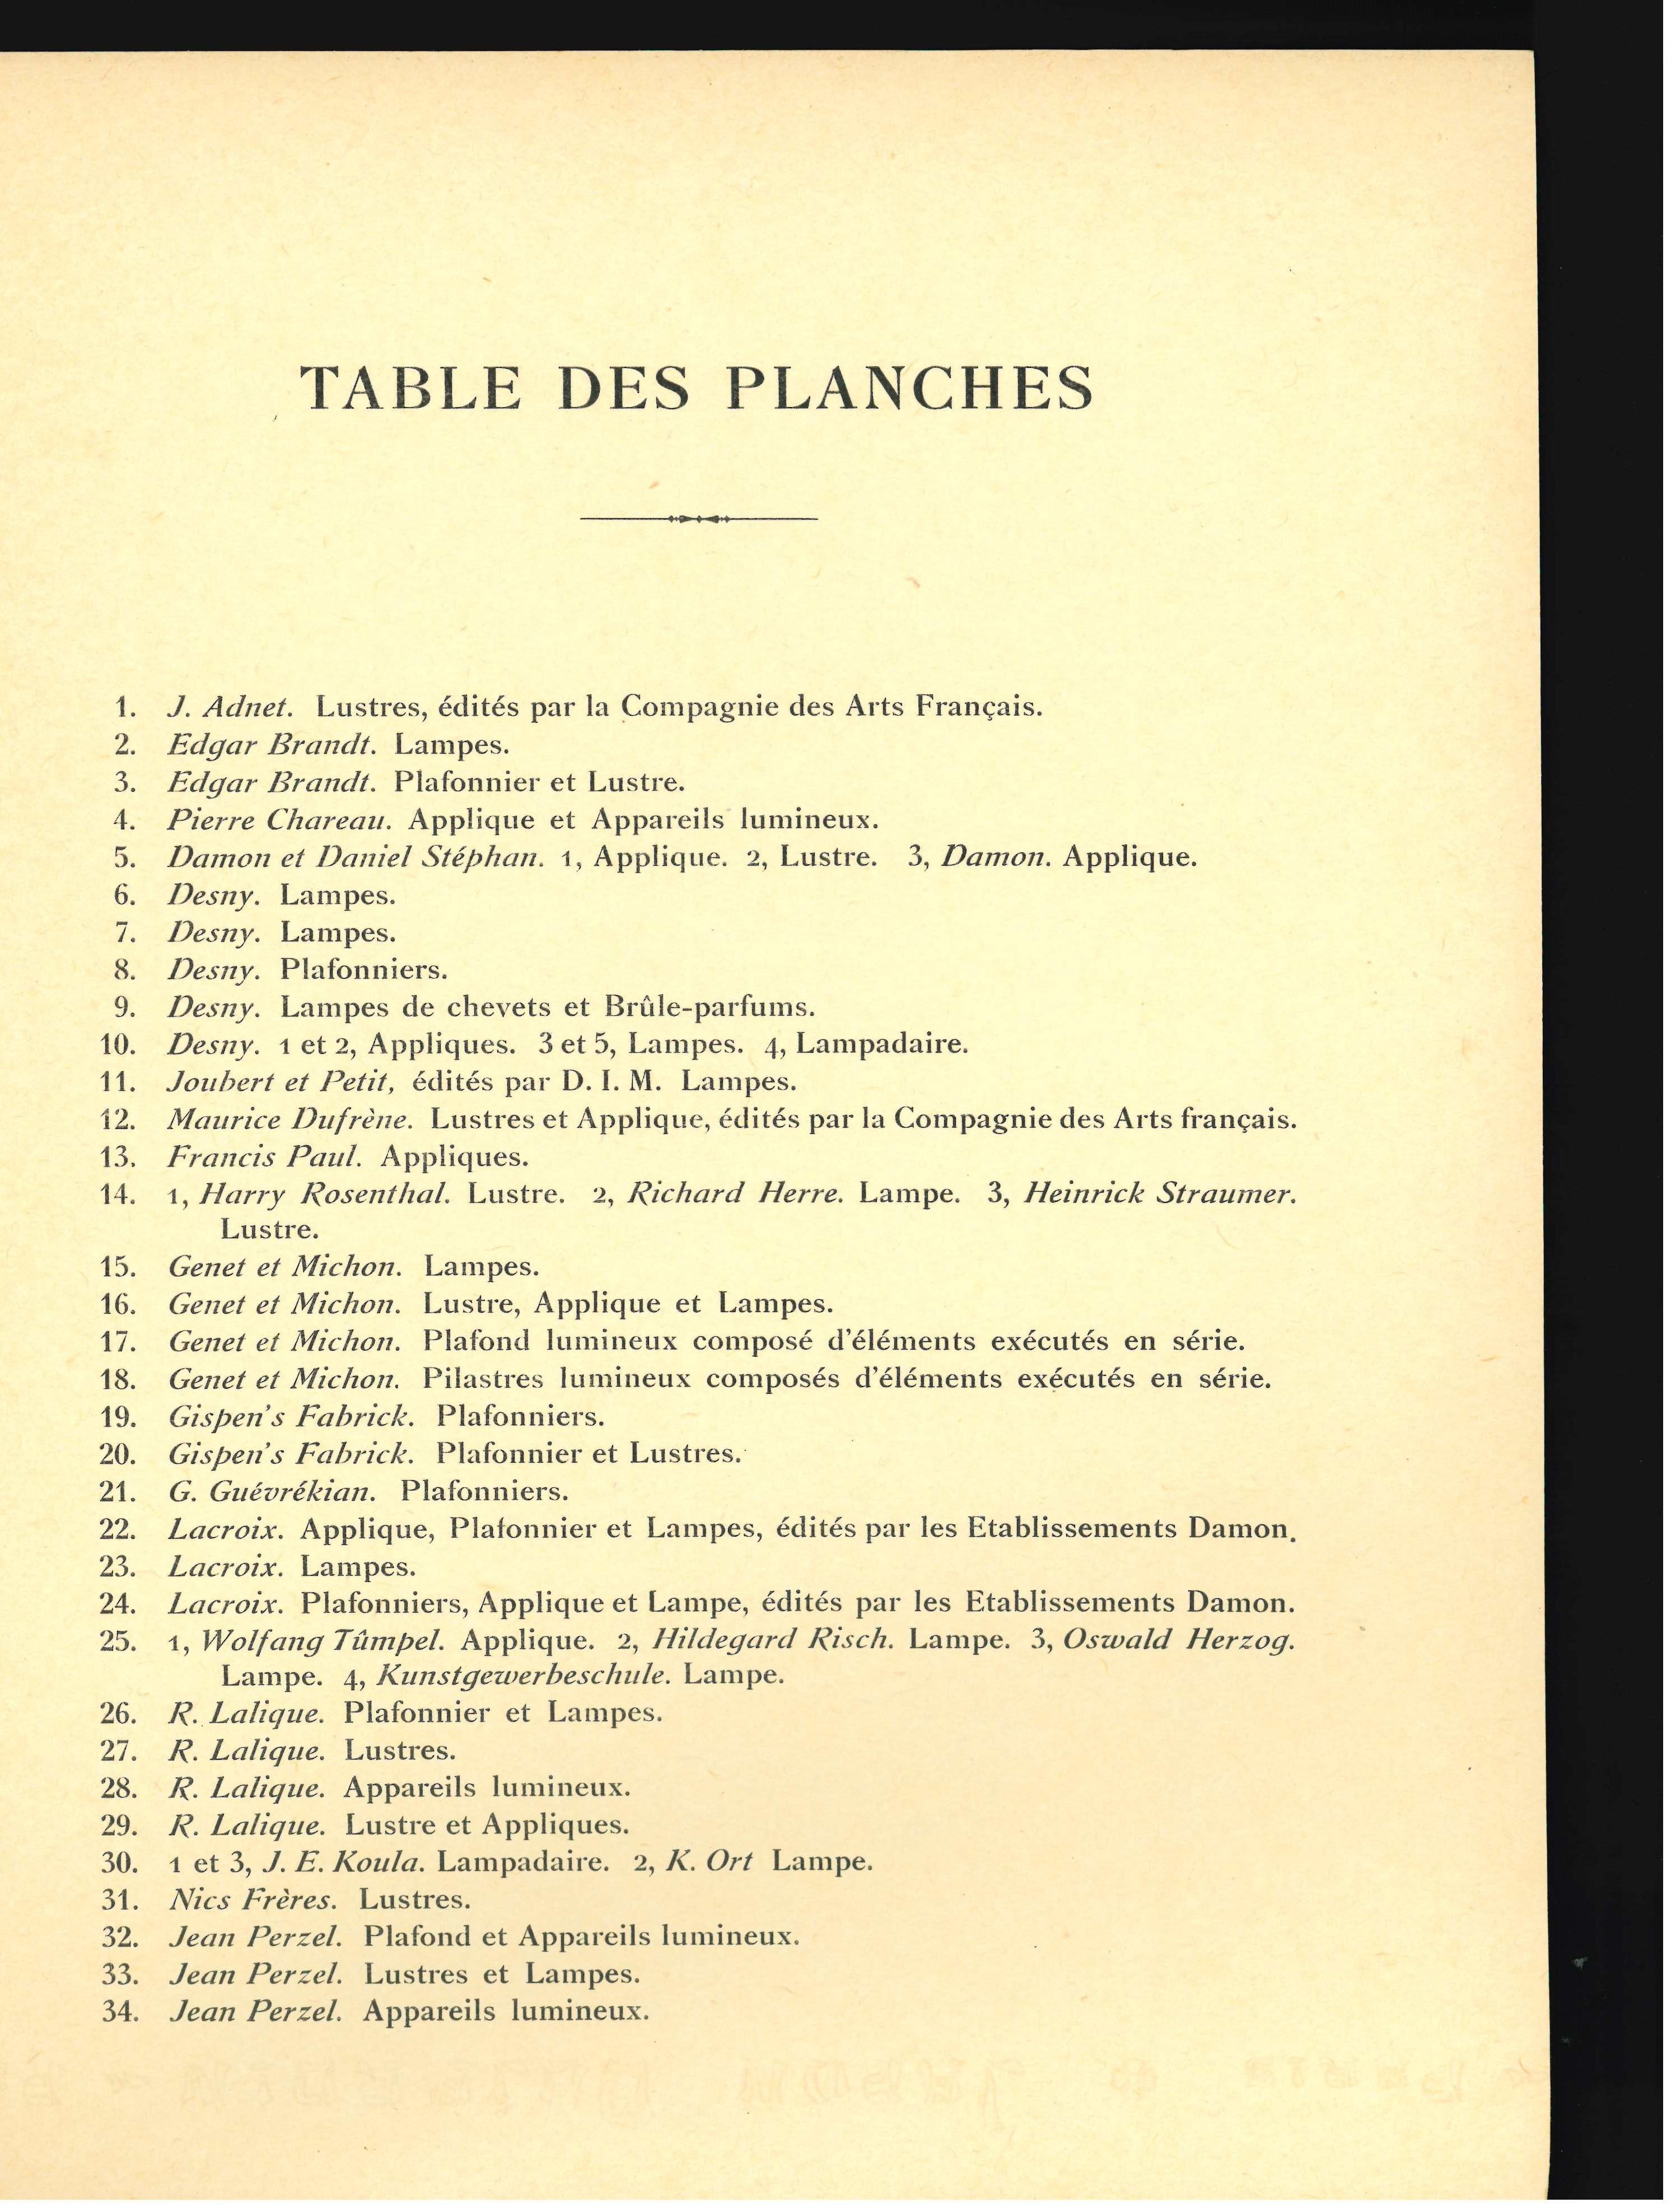 A very good hard backed portfolio which contains 50 plates by many of the masters of Art Dec design and in particular - lighting. Published 1929/30 by Moreau of Paris. There is a brief essay by Guillaume Janneau and it is complete with fifty plates